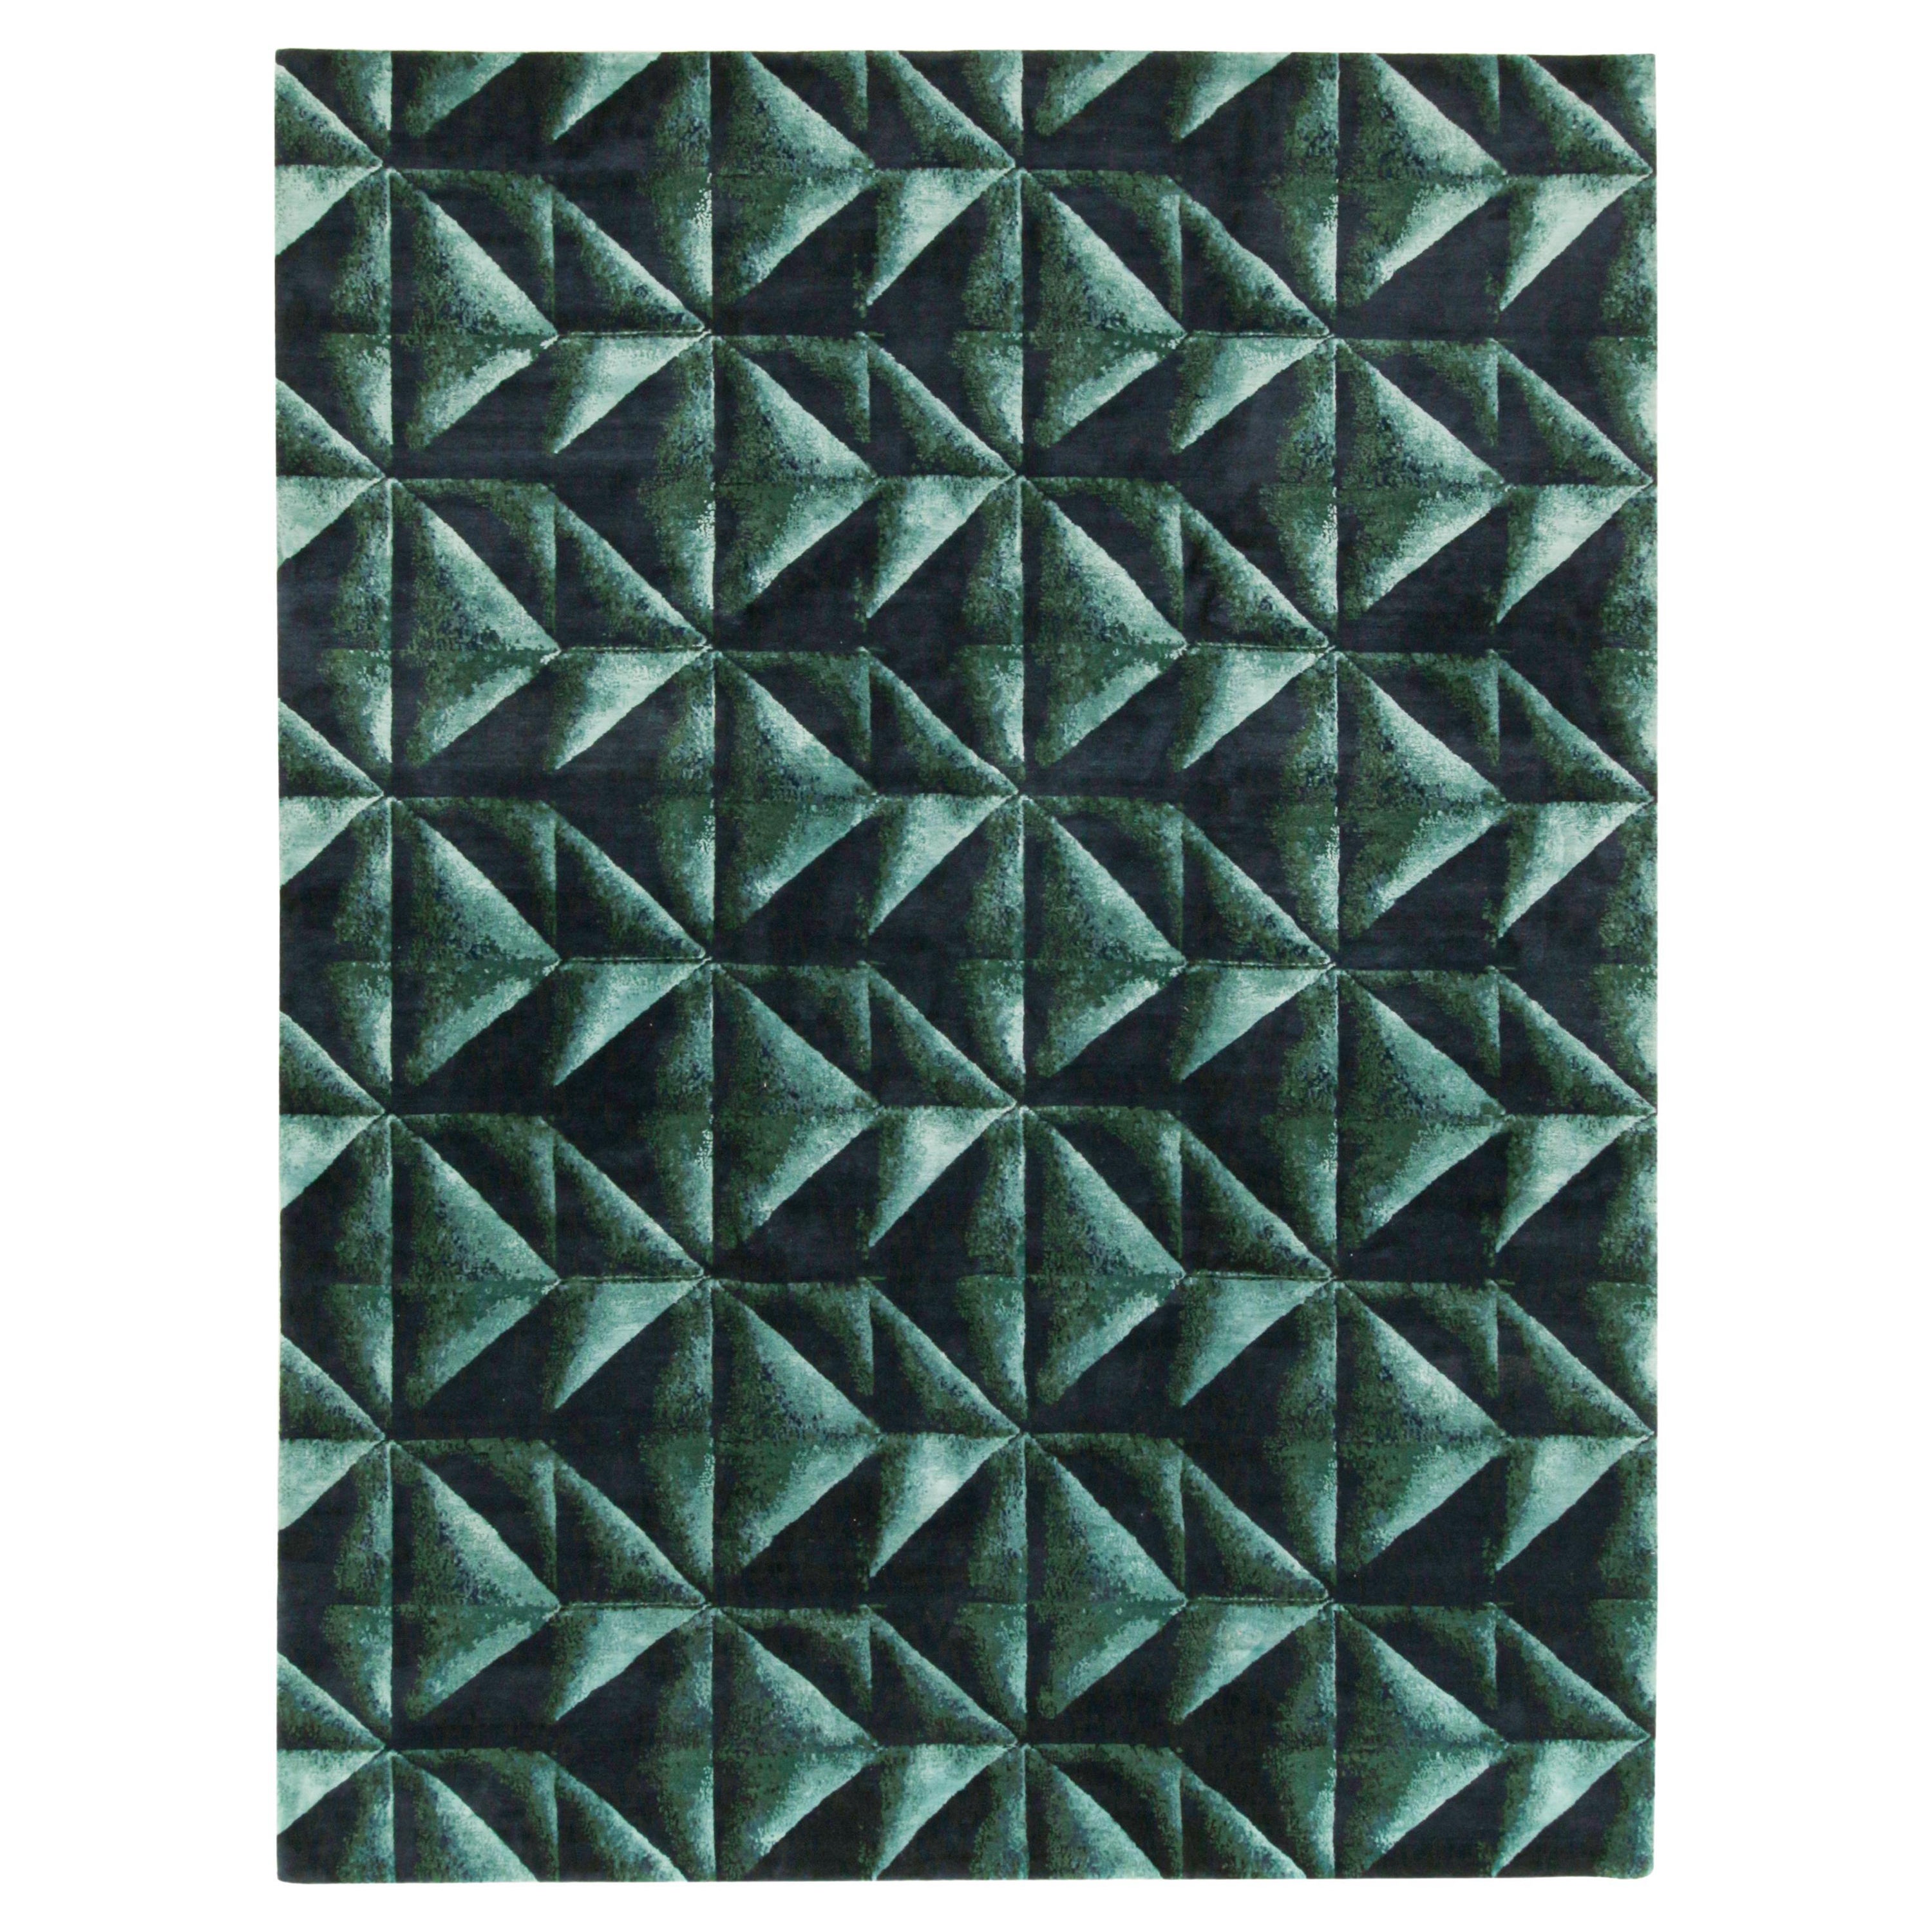 Rug & Kilim’s Abstract Rug in Deep Teal and Black Origami Style Pattern